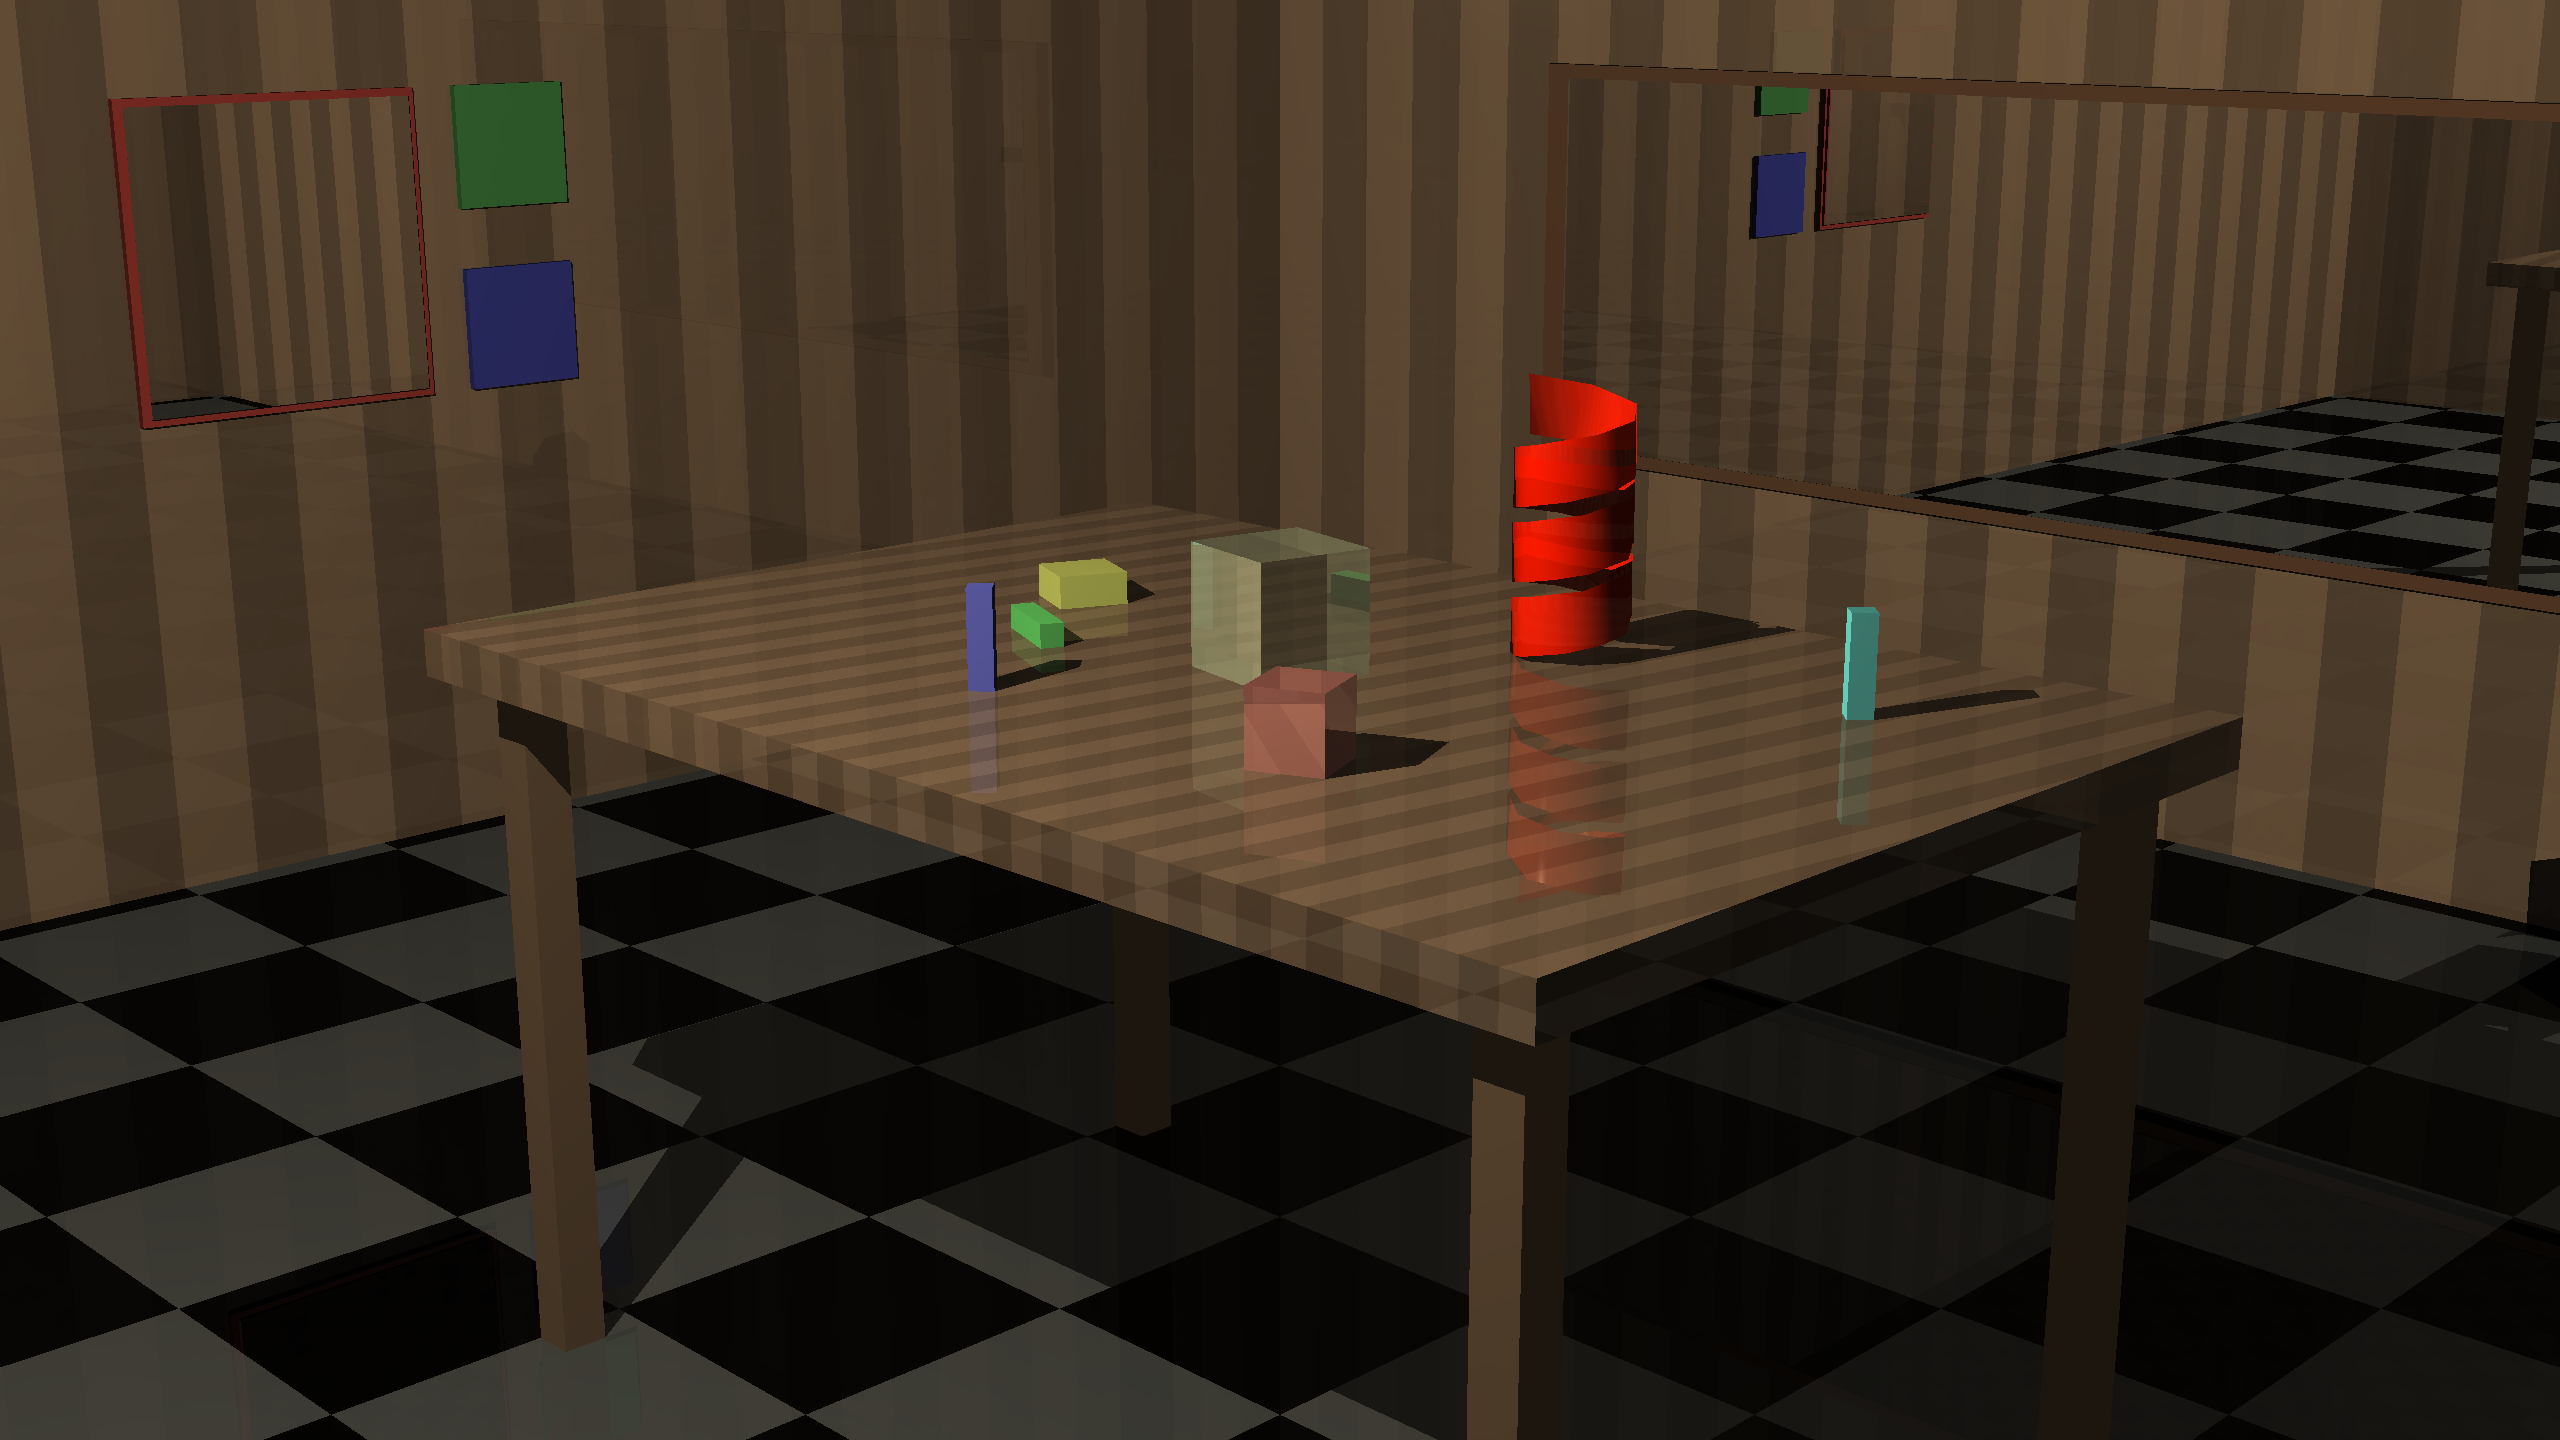 Example image from my Ray Tracer implementation